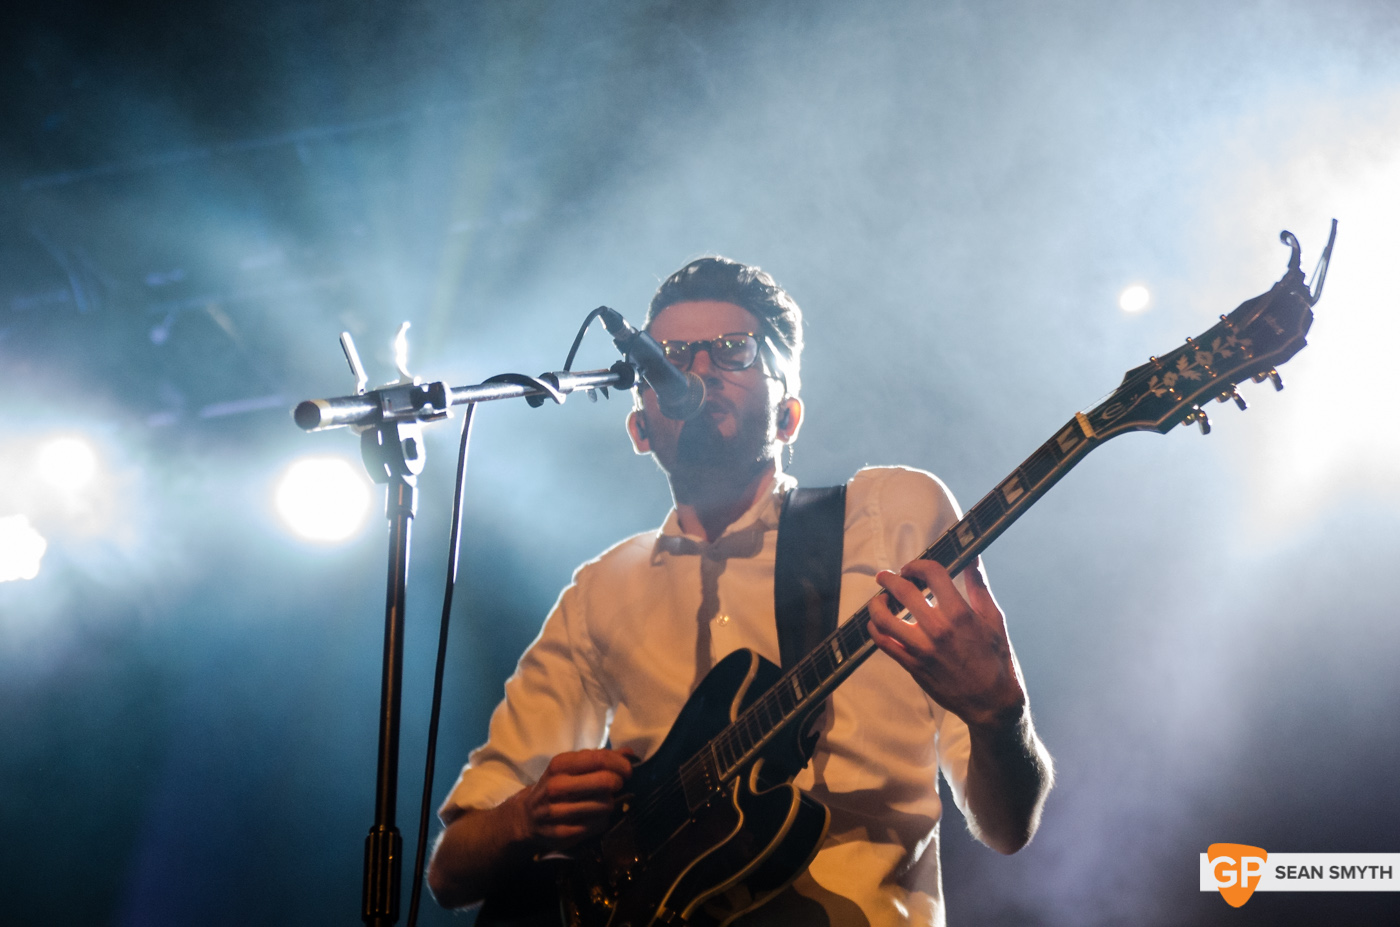 hudson-taylor-at-the-olympia-theatre-26-2-15-by-sean-smyth-1-of-26_16569197878_o